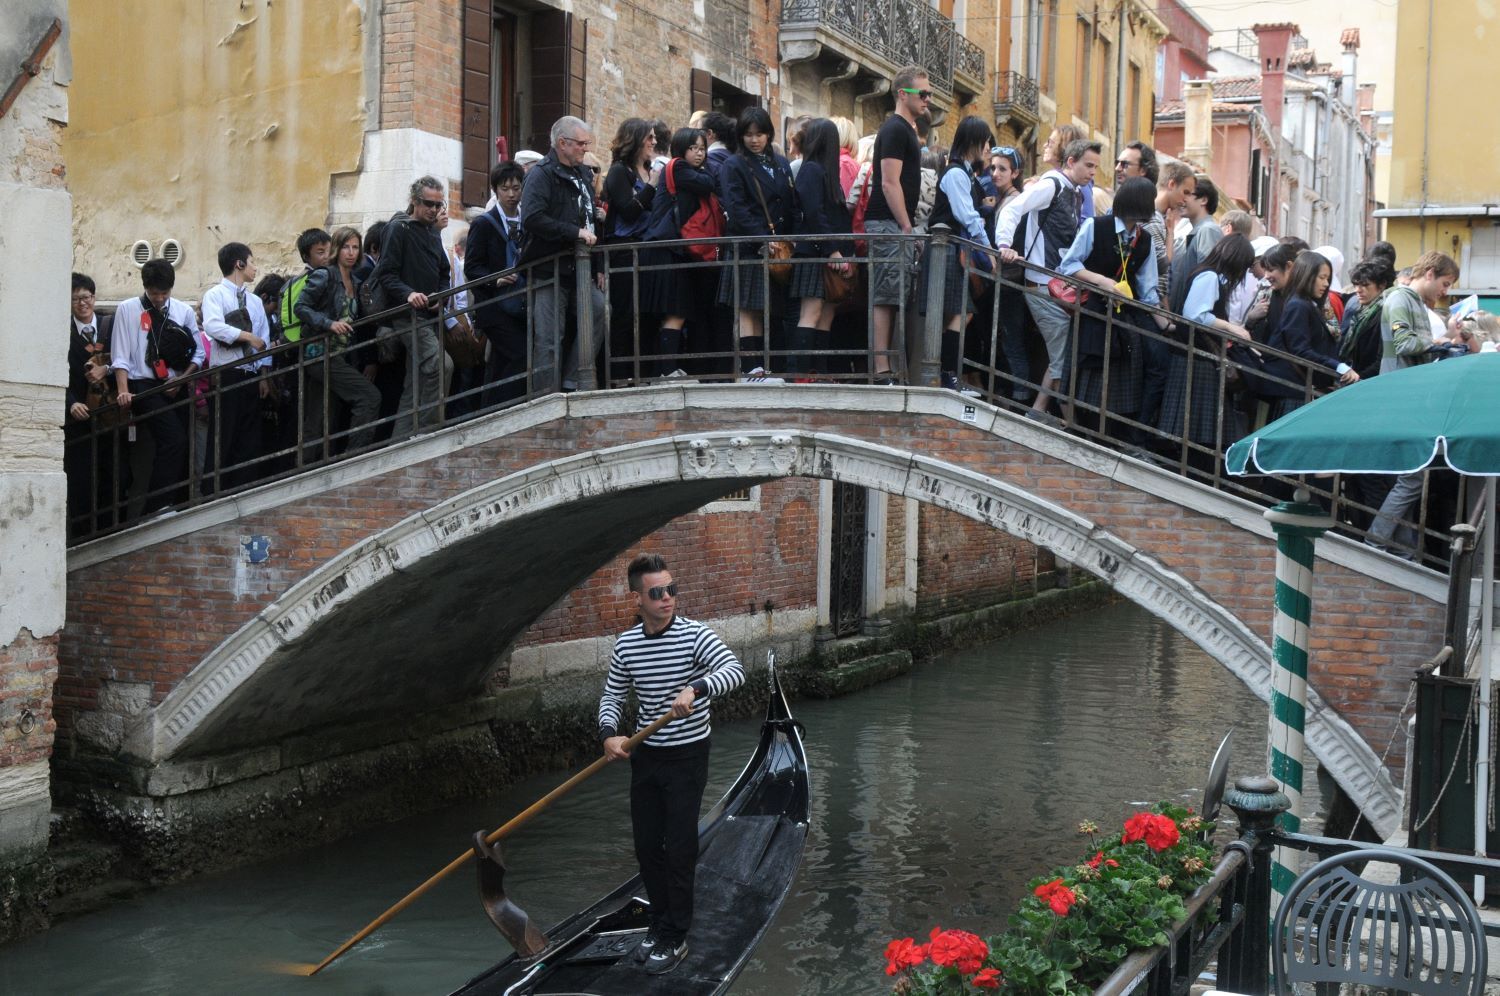 A throng of people on a small bridge over a canal in Venice. A gondolier in sunglasses and a white and black striped shirt poles a boat under the bridge.